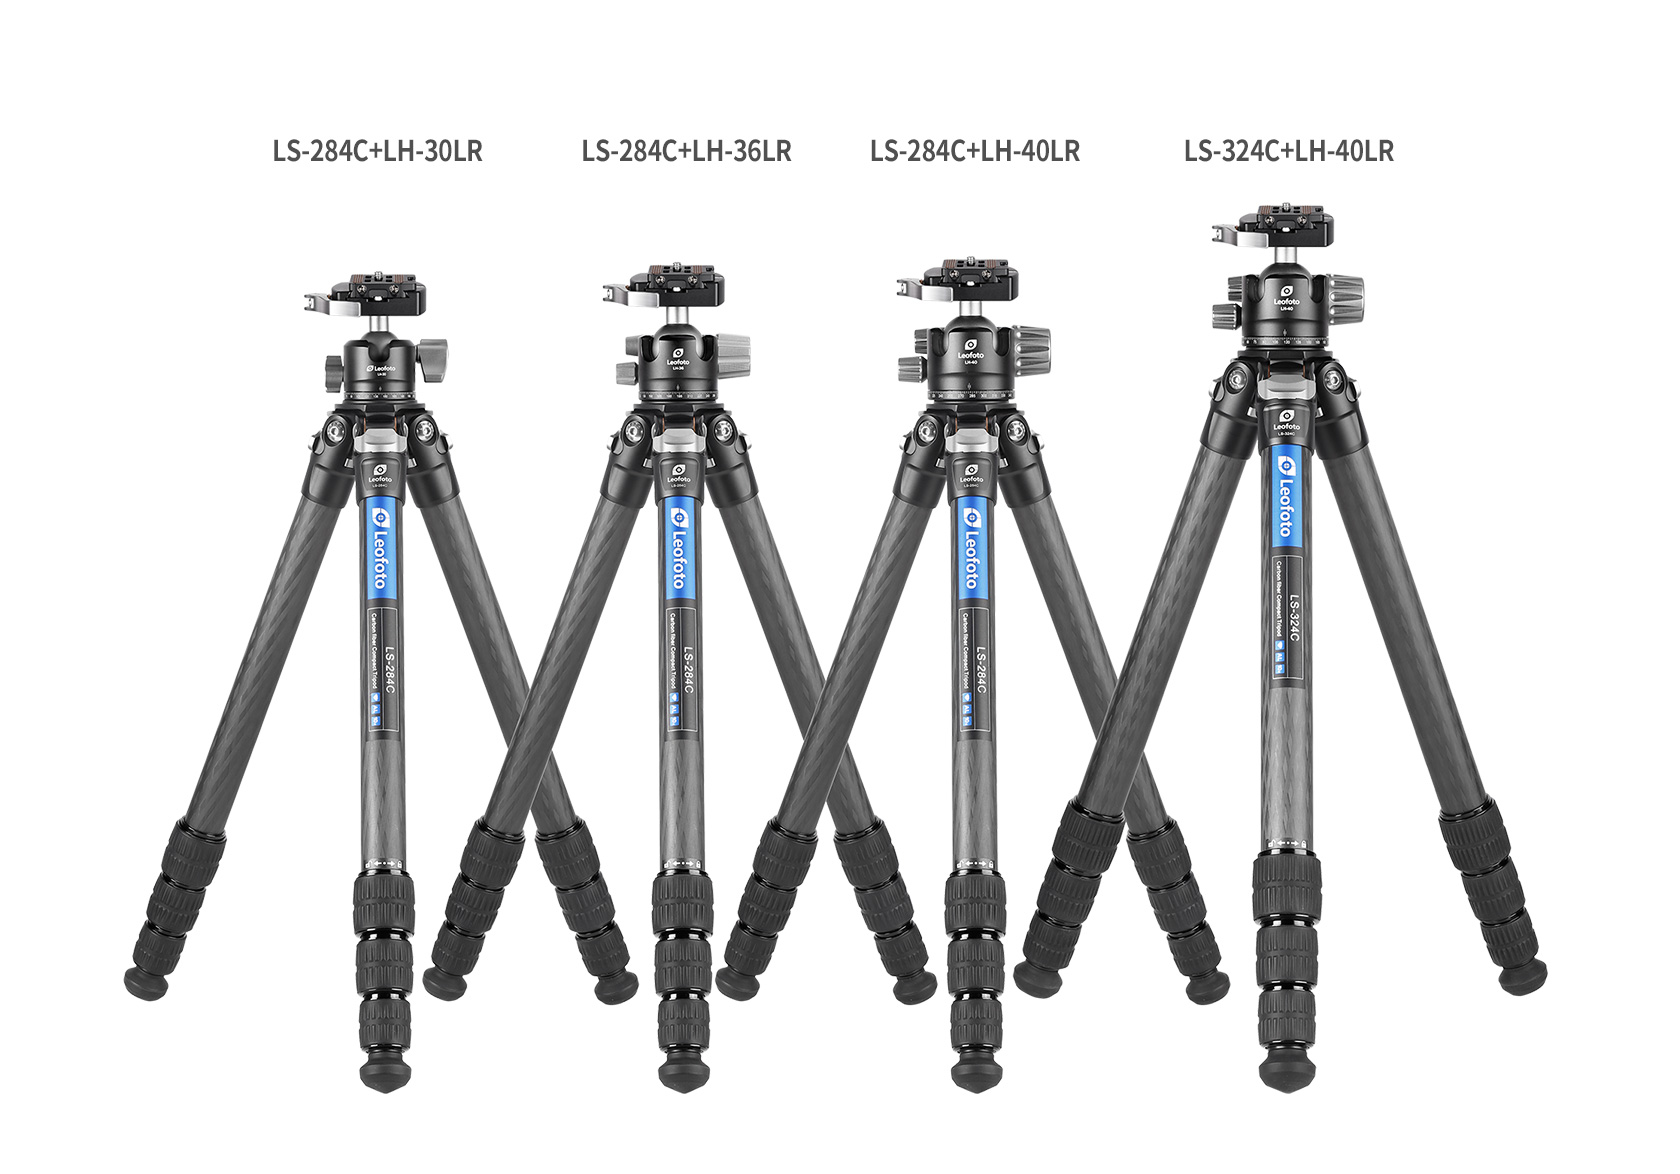 Double Openings and RH-2L Double Panoramic Holder Professional Spherical pan/tilt Leofoto LH-40R with Low Center of Gravity 